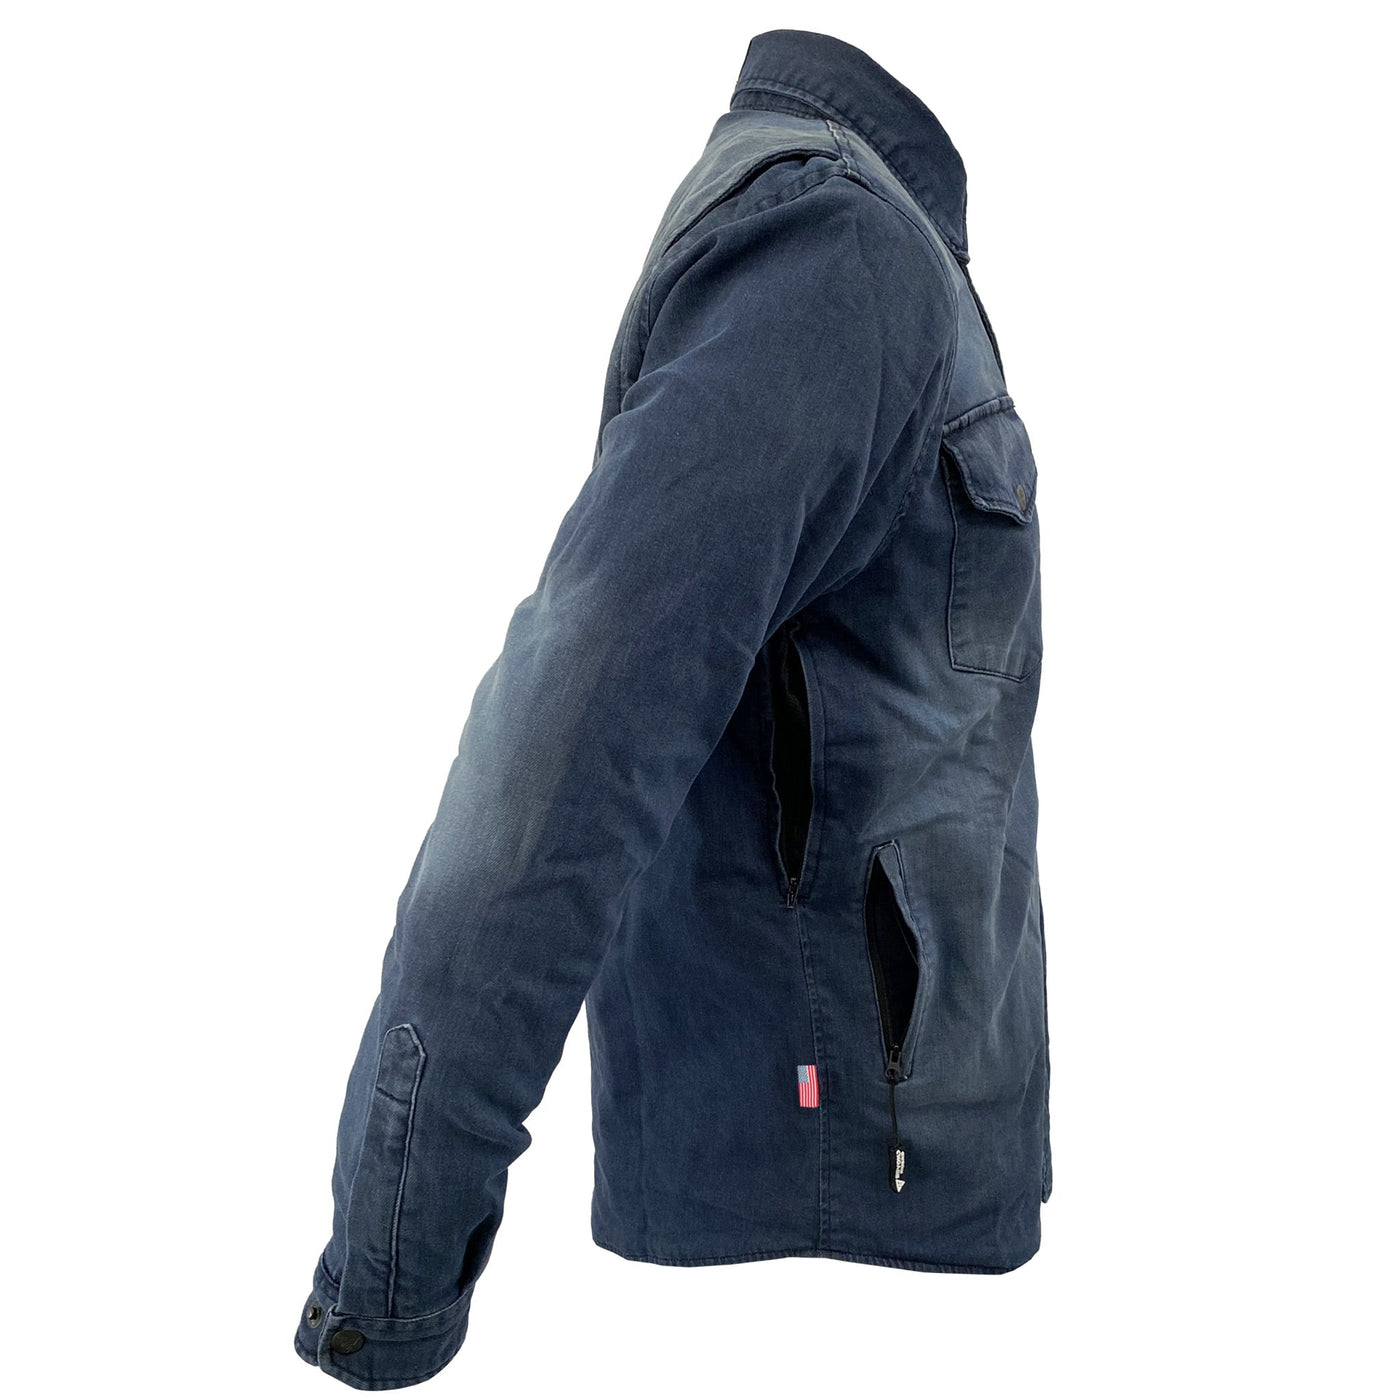 Protective Jeans Jacket with Pads - Blue Faded